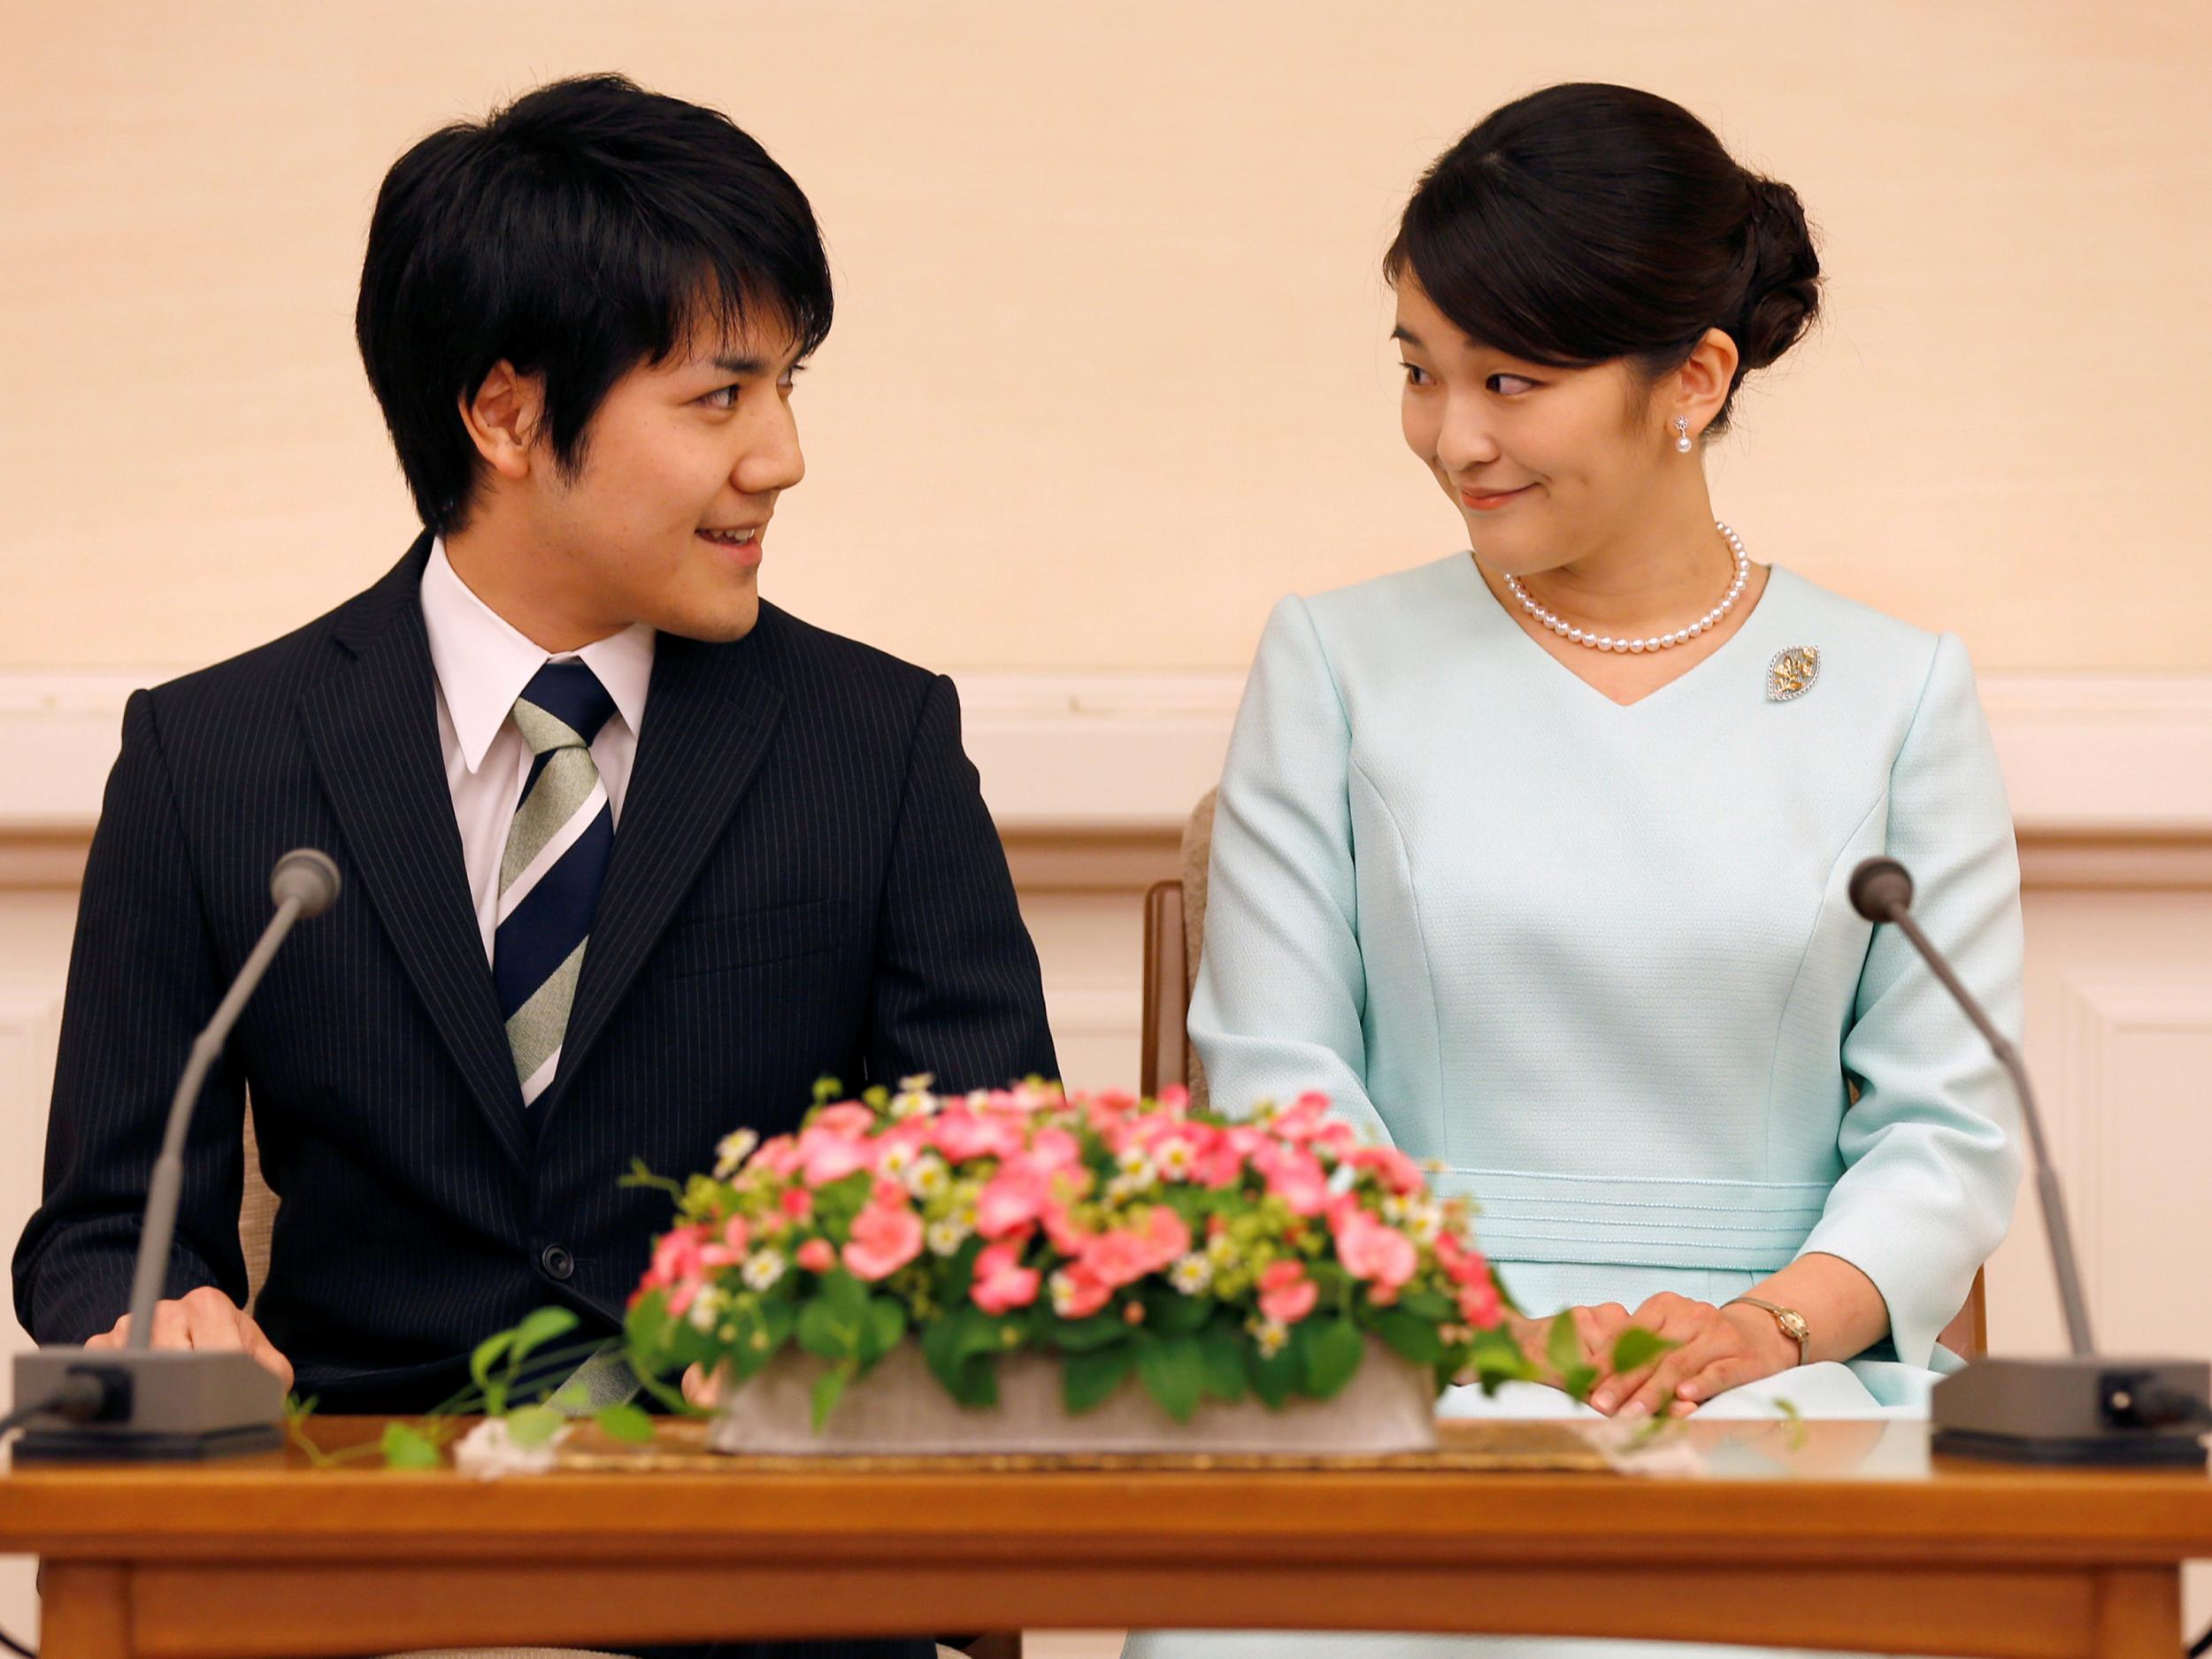 Princess Mako and fiance Kei Komuro at a press conference announcing their engagement in September 2017